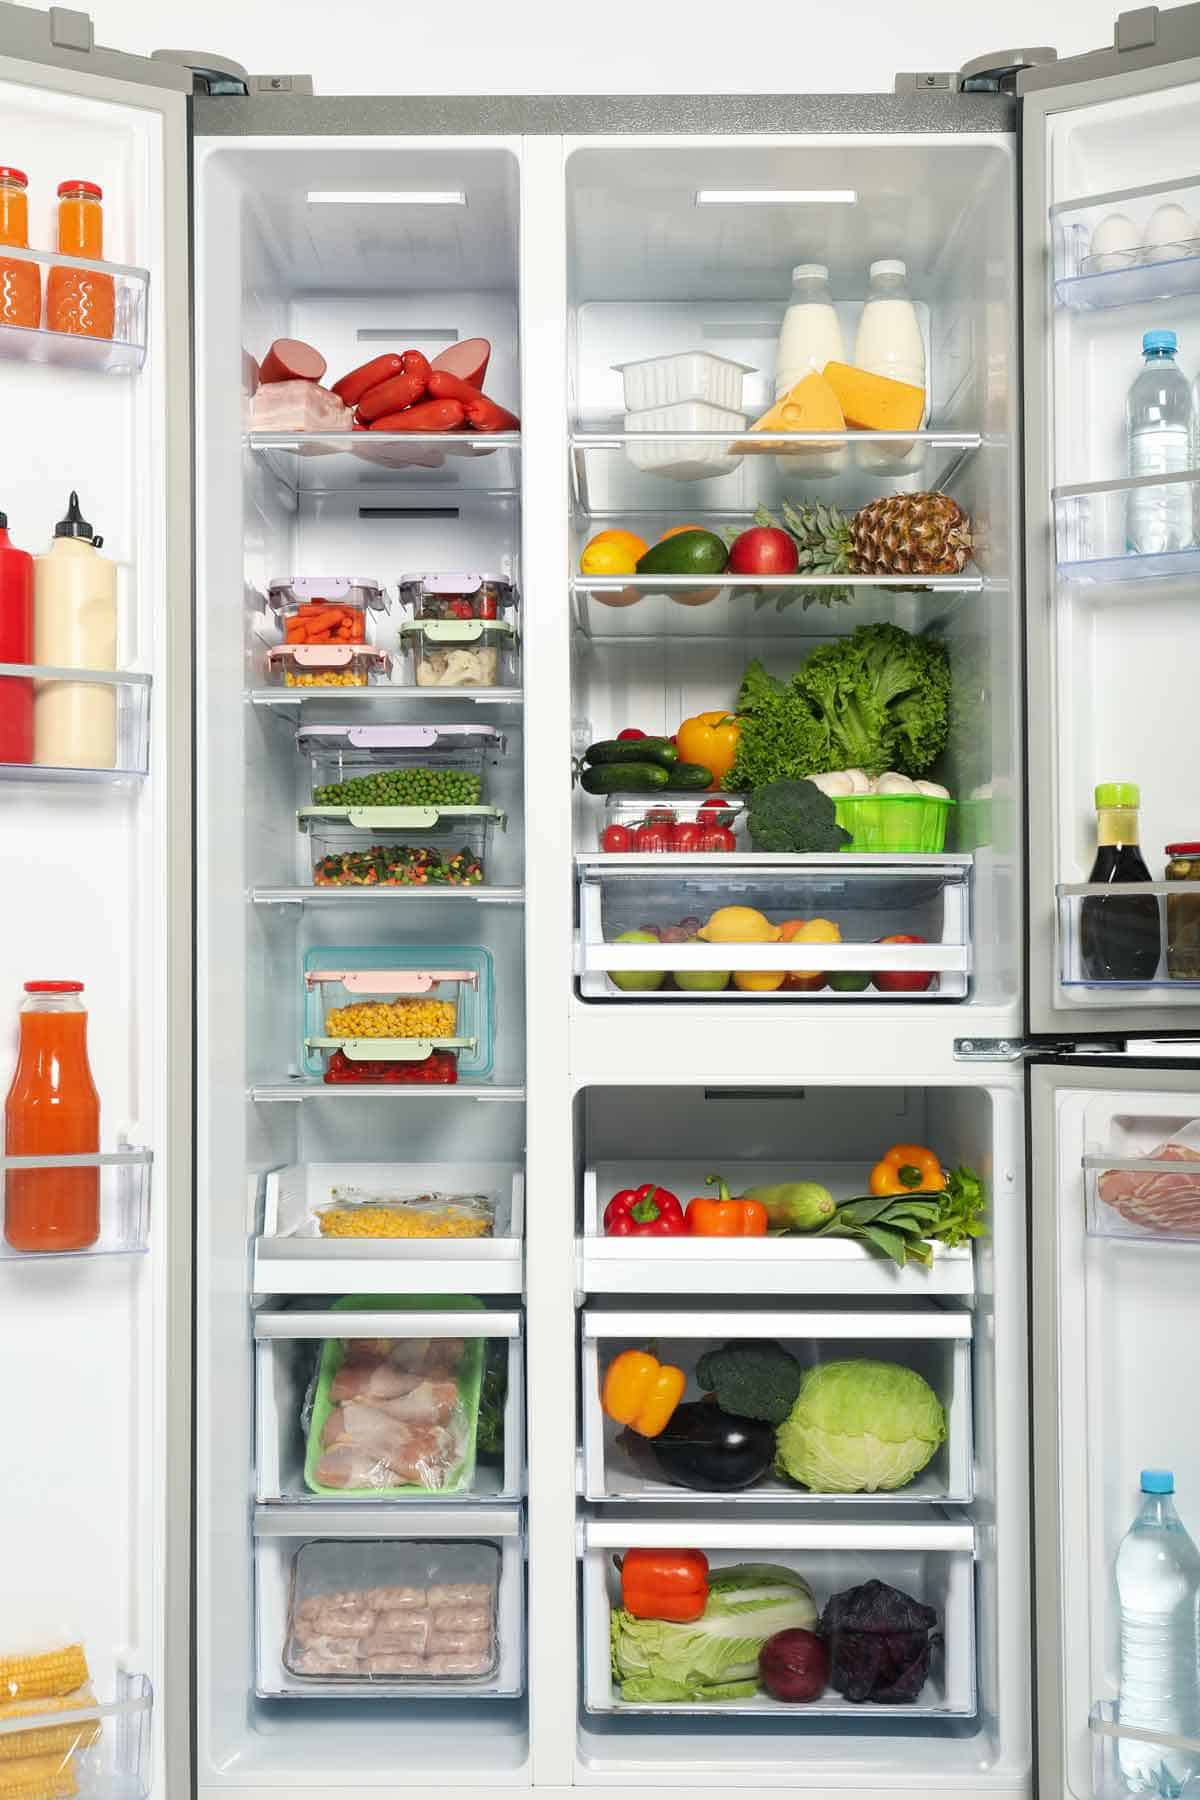 A refrigerator with food, including chicken salad leftovers.